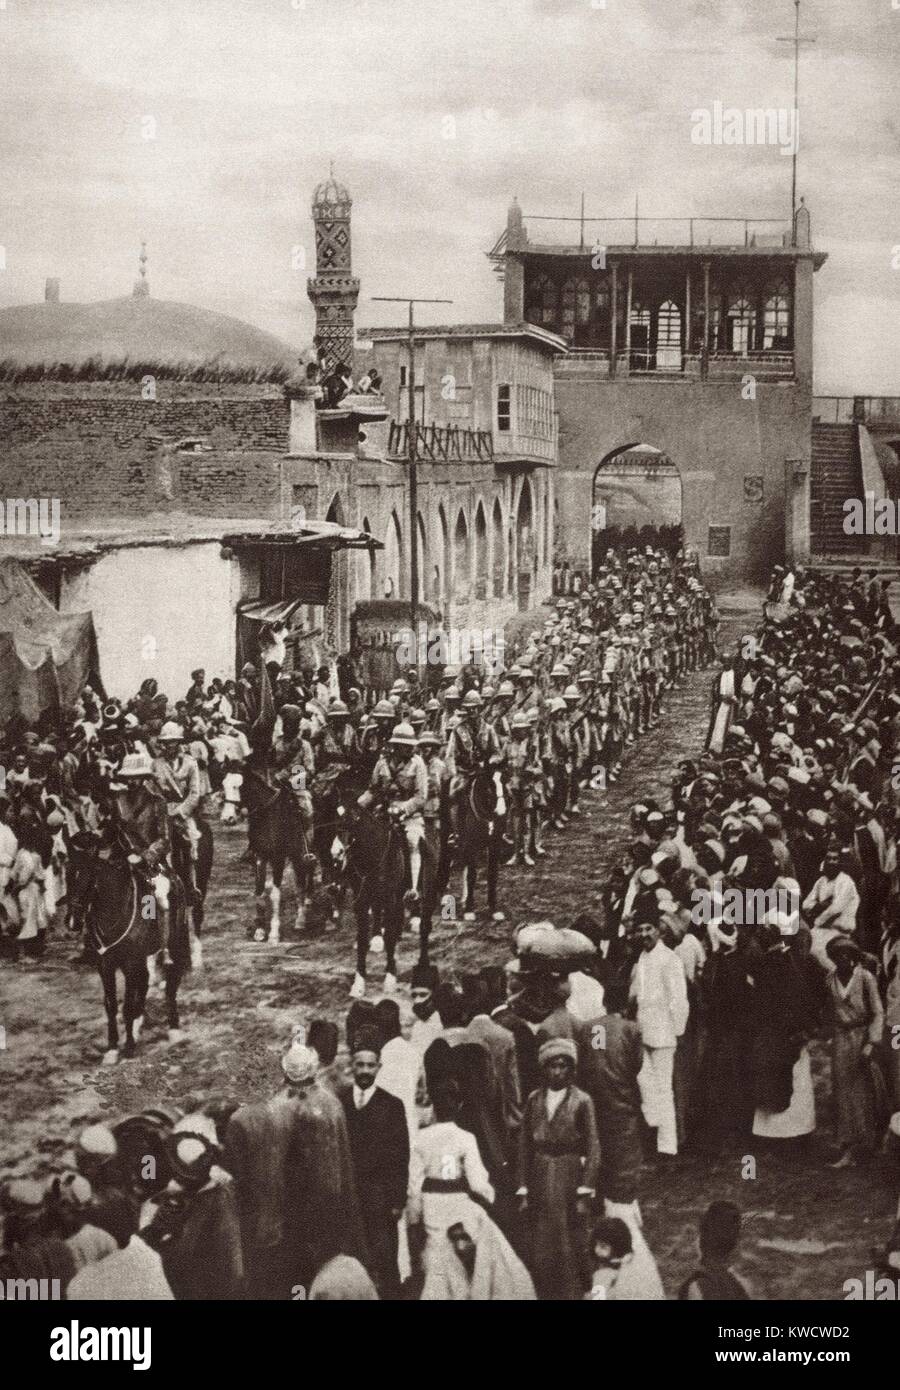 World War 1 in the Middle East. British troops entered Bagdad, Iraq, on March 11, 1917. The three month campaign, begun on Dec. 16, 1917, fought mostly by British Empire troops from India, overcame significant Turkish resistance. (BSLOC 2013 1 80) Stock Photo